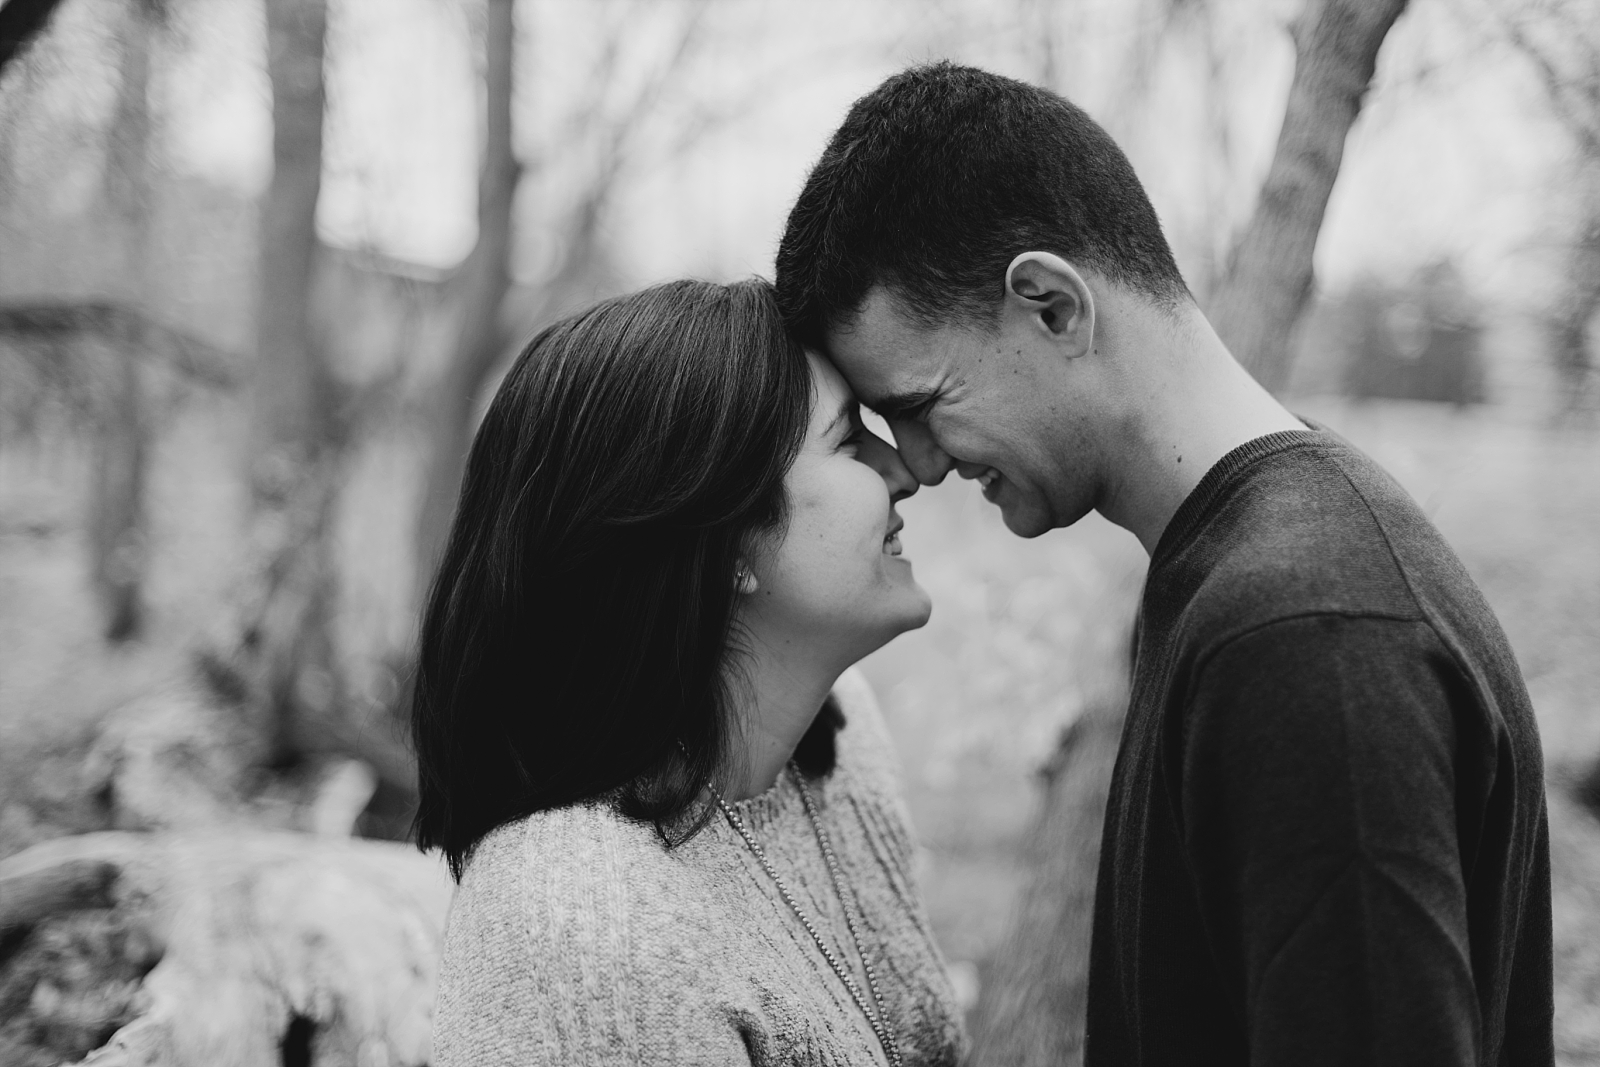 Romantic playful adventurous fall leaves forest black and white engagement photo session in prescott arizona samantha patri photography